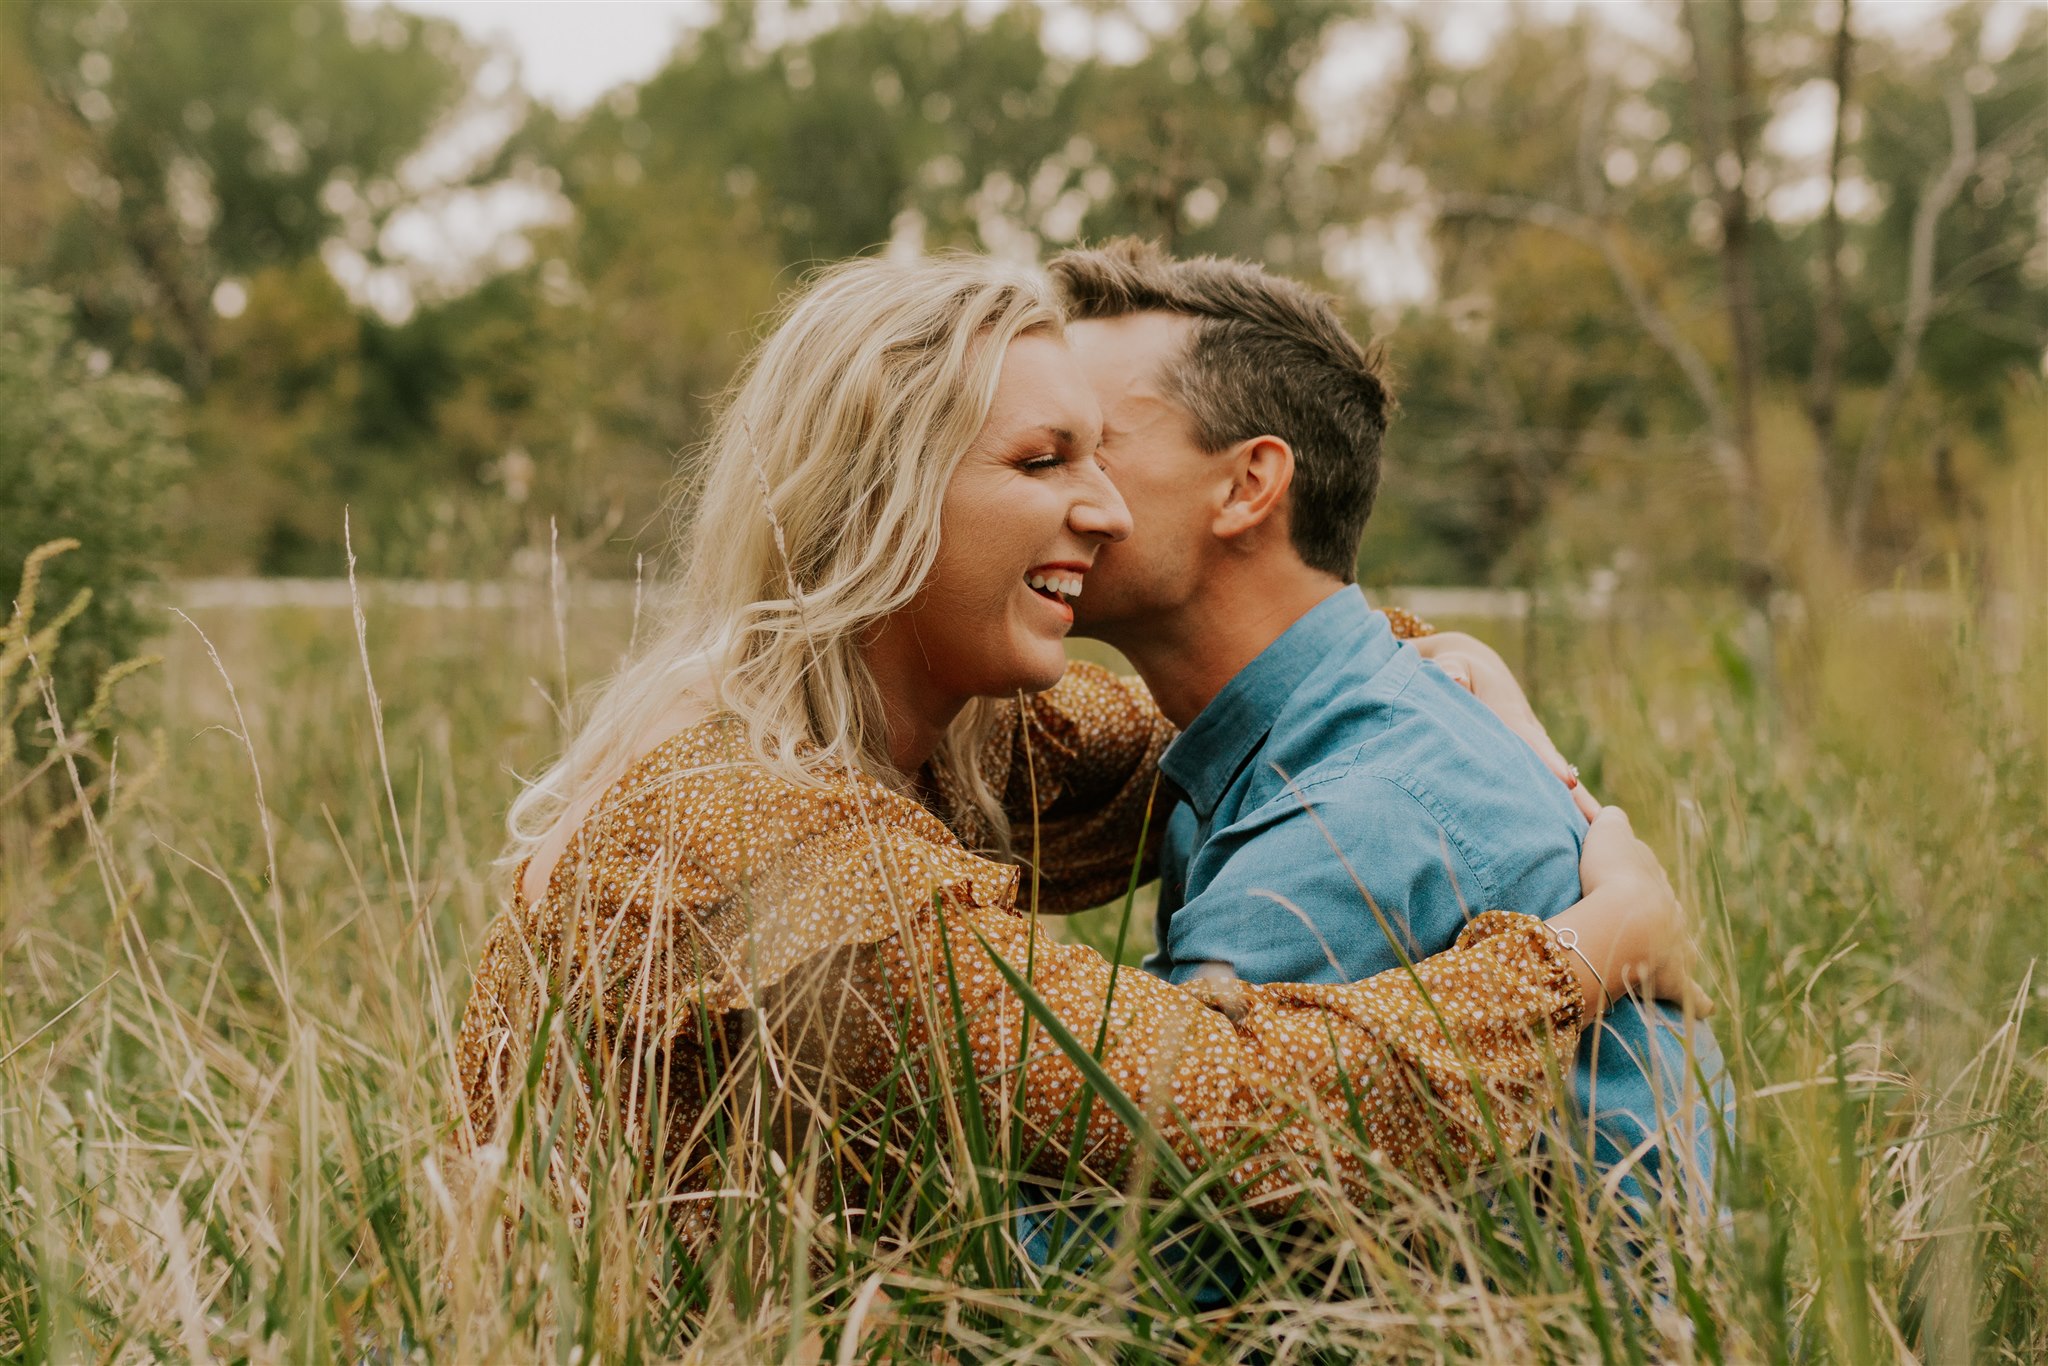 man and woman sitting in grassy omaha field during engagement session